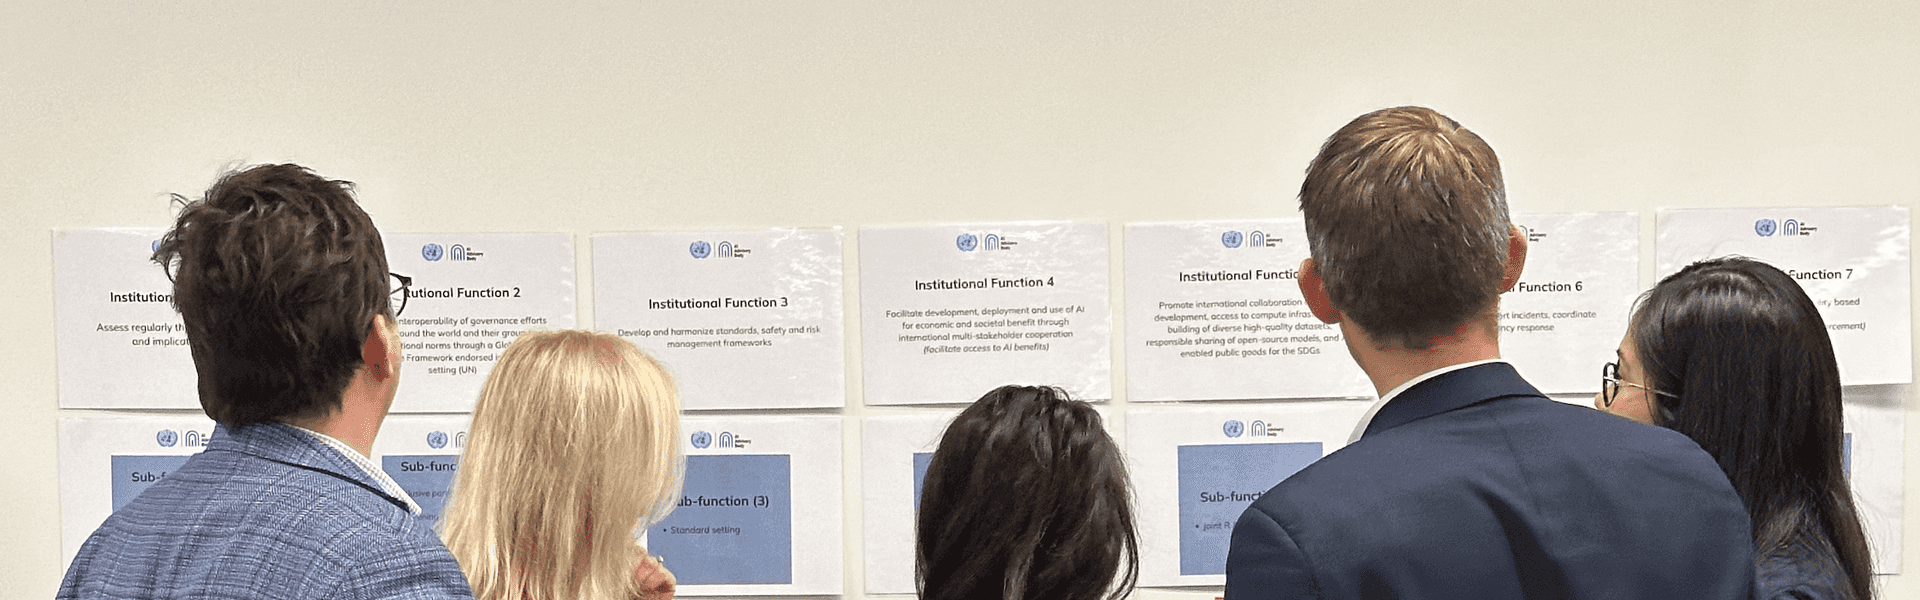 Training Course on AI Governance for UN Missions in New York featured image